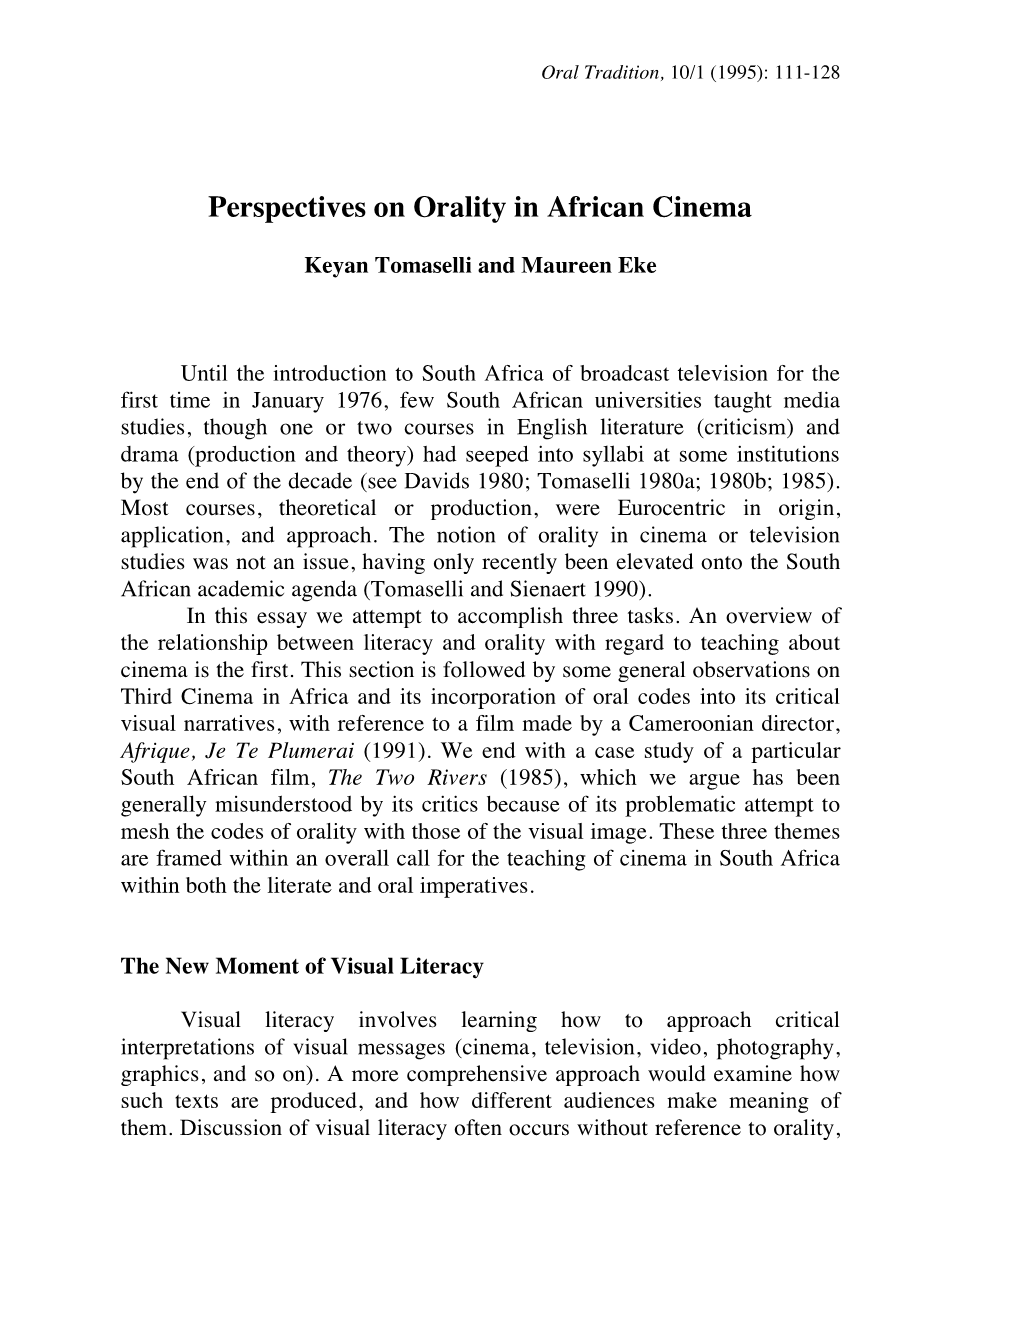 Perspectives on Orality in African Cinema